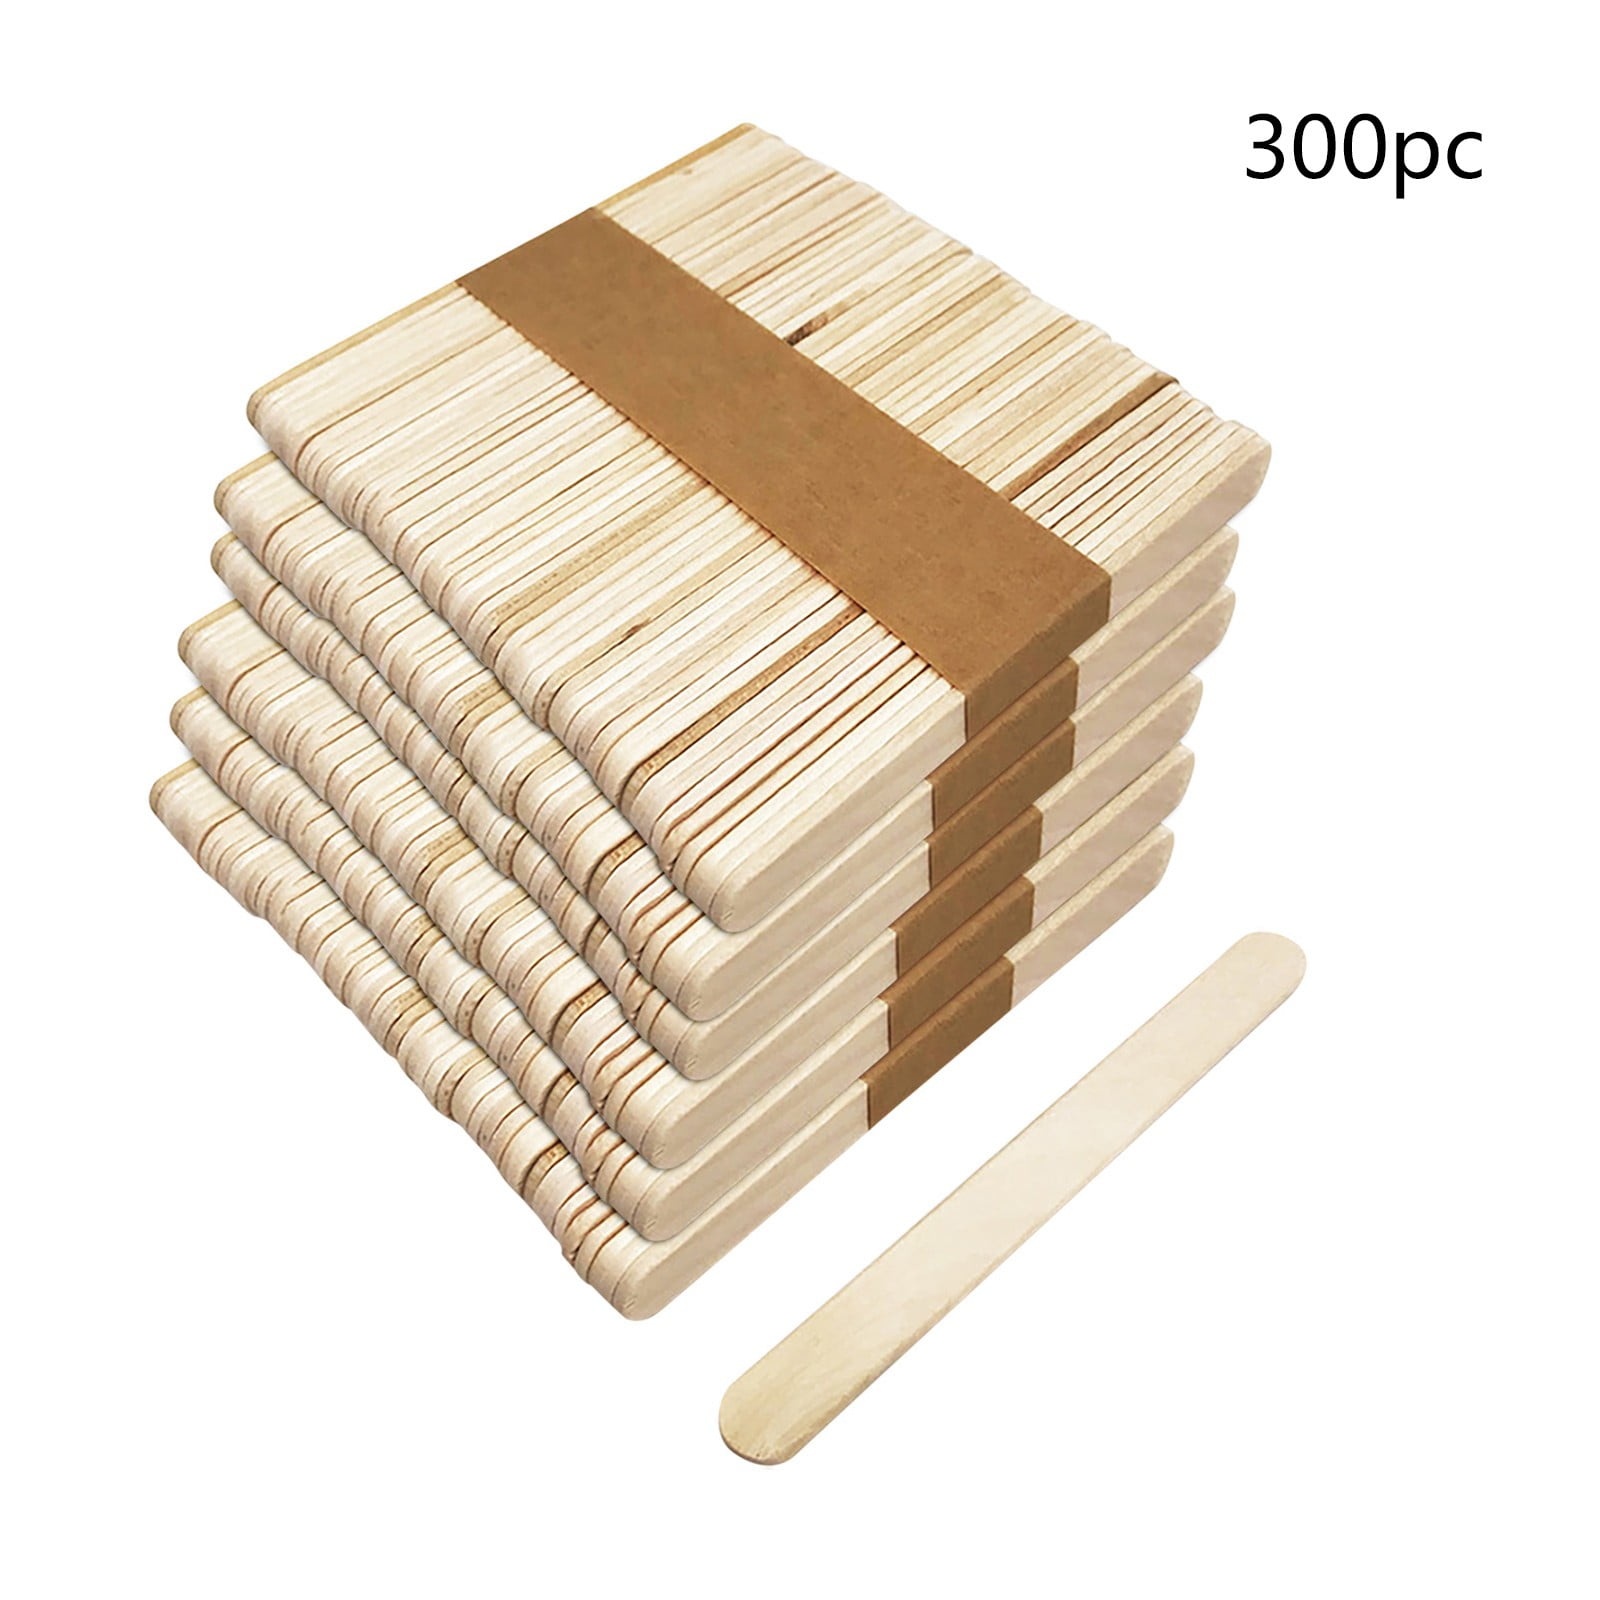 50 Pcs Colorful Popsicle Sticks Sawtooth Wood Craft Stick Colorful Wooden Popsicle  Sticks Bulk For DIY Crafts Gifts Home Decor - AliExpress